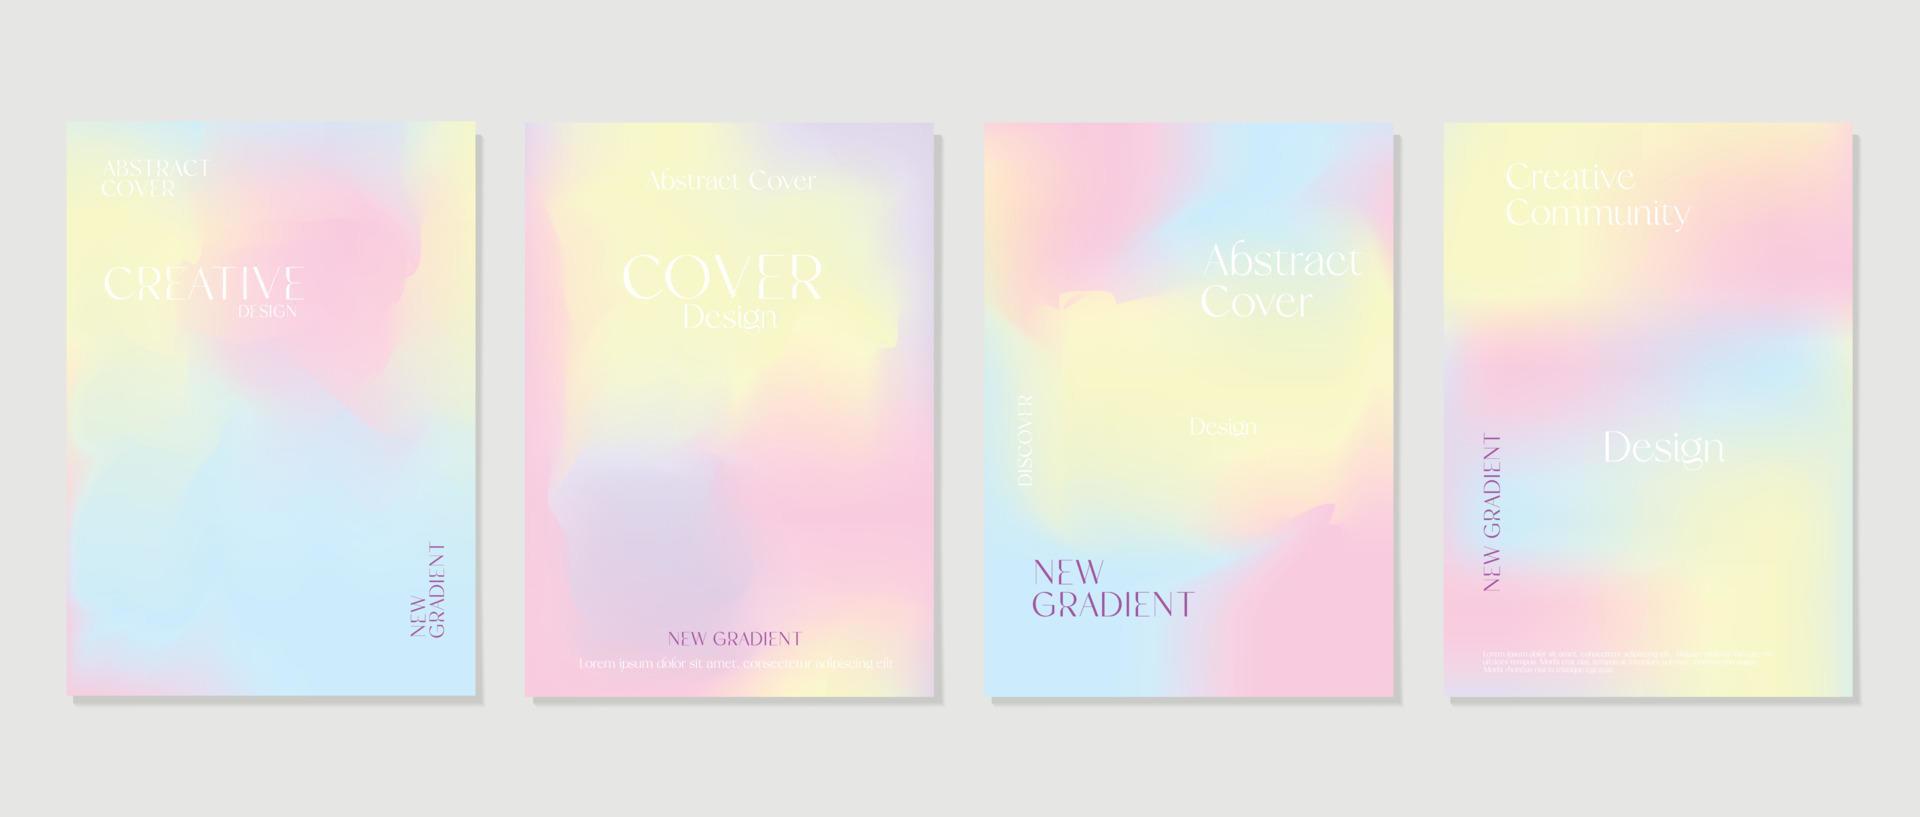 Set of vector gradients in pastel colors. For covers, wallpapers, branding, and other projects